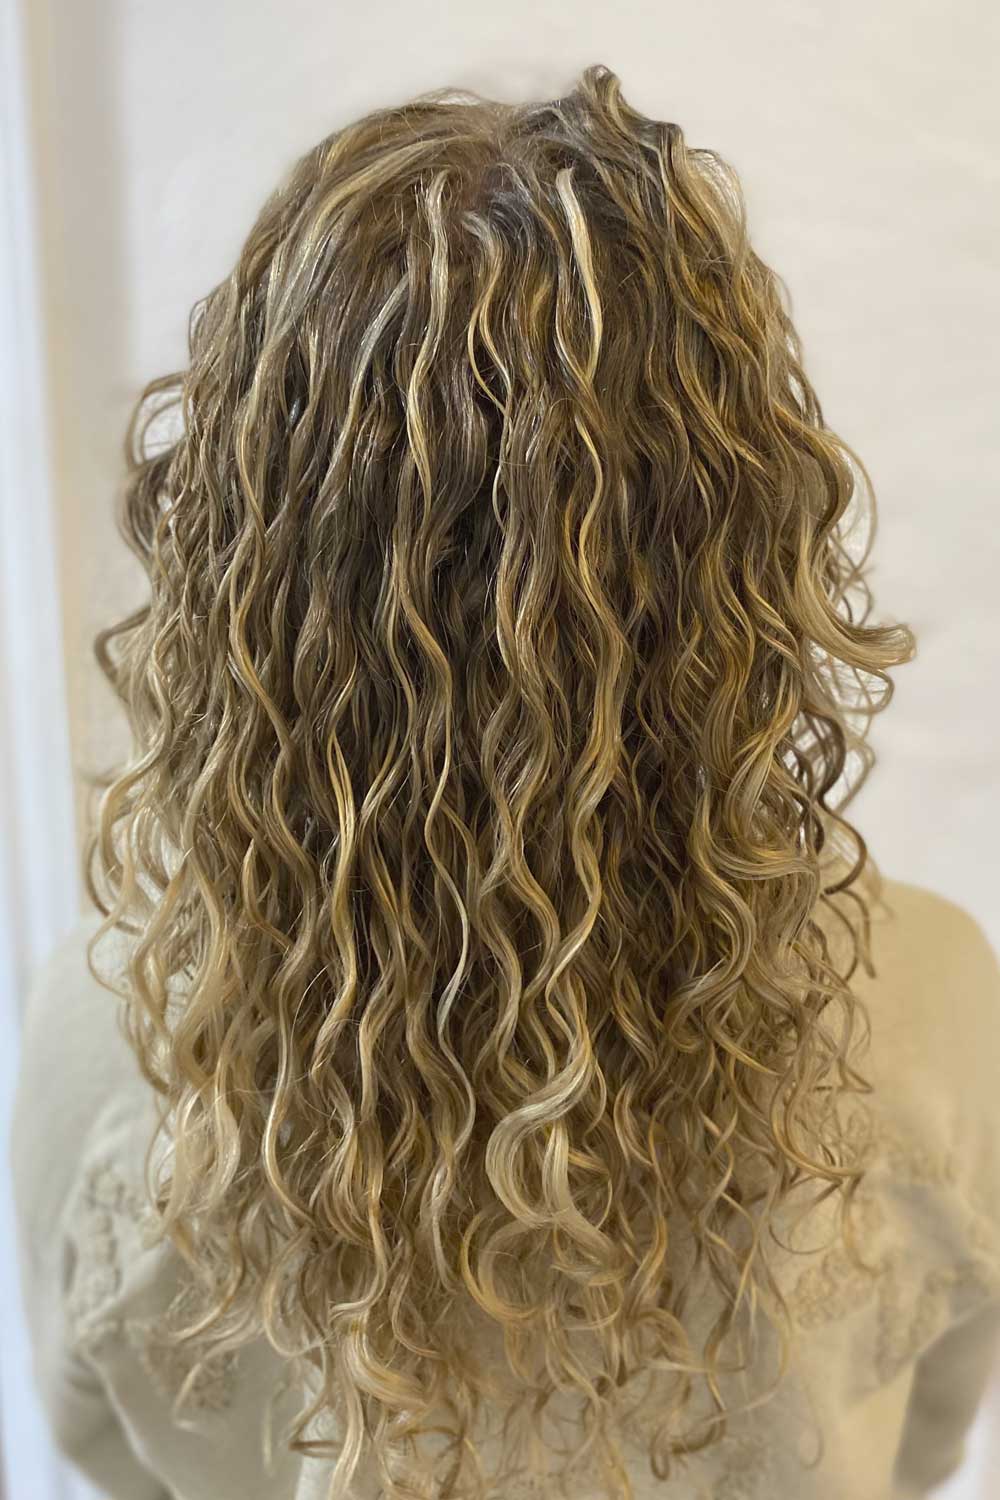 Coloring curly hair is no different. So, how to color curly hair so that you do not wreak havoc on it?